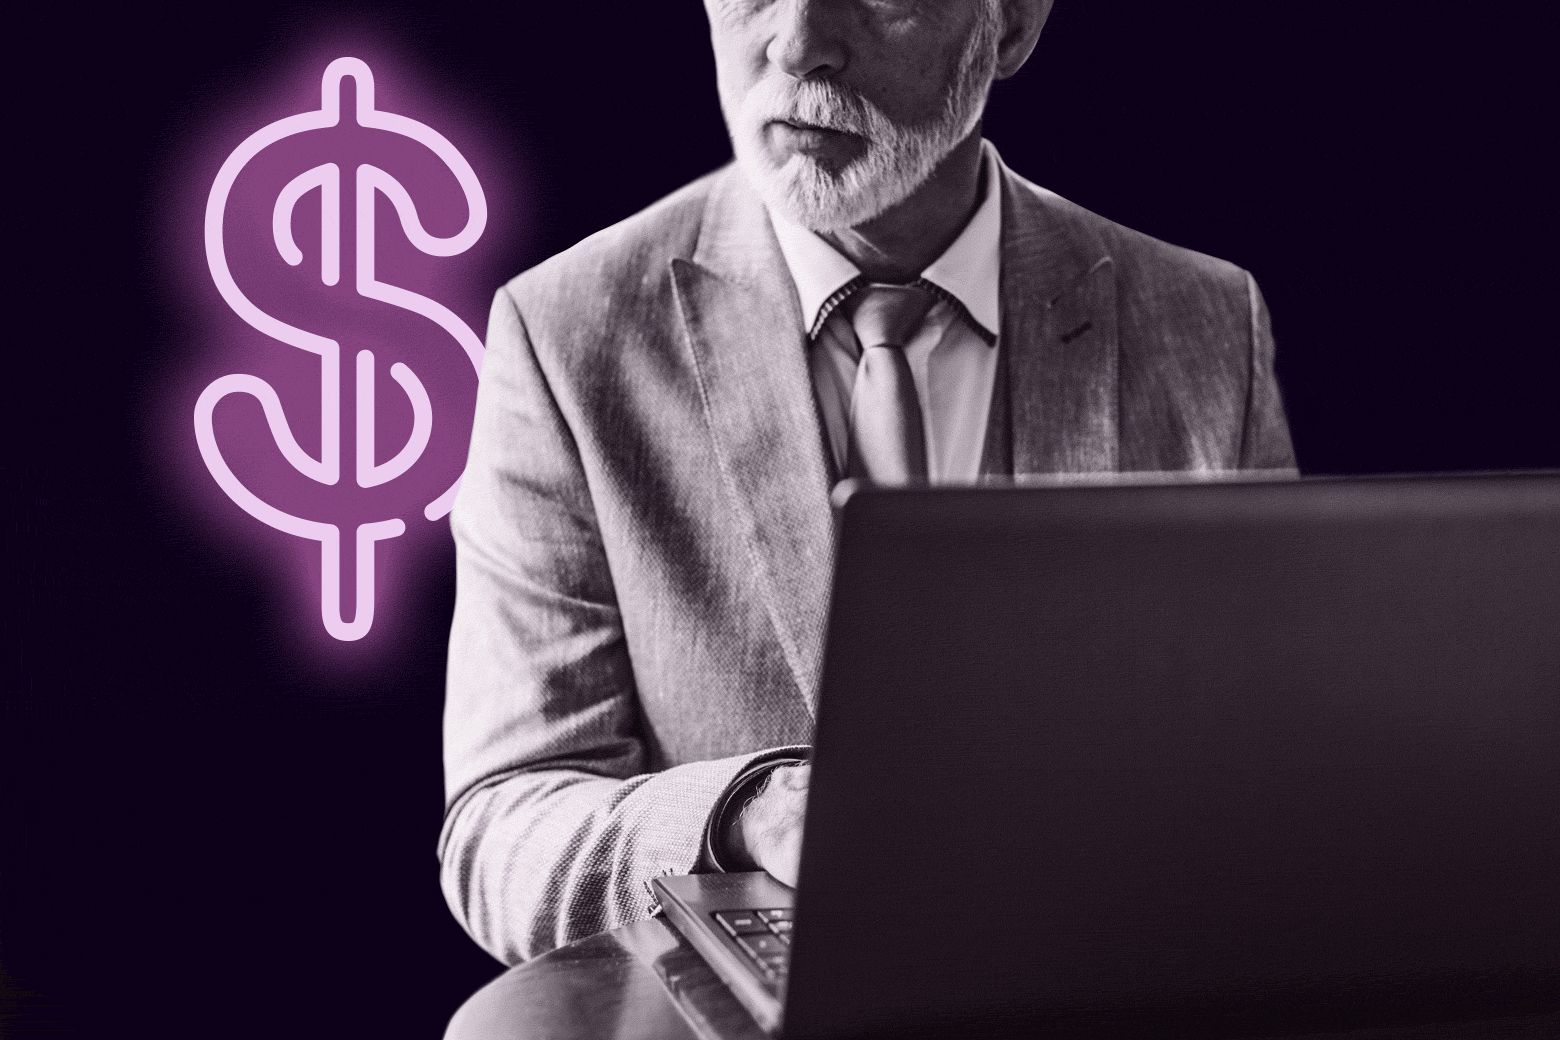 Older man on a computer looking over his shoulder at a neon pink dollar sign.